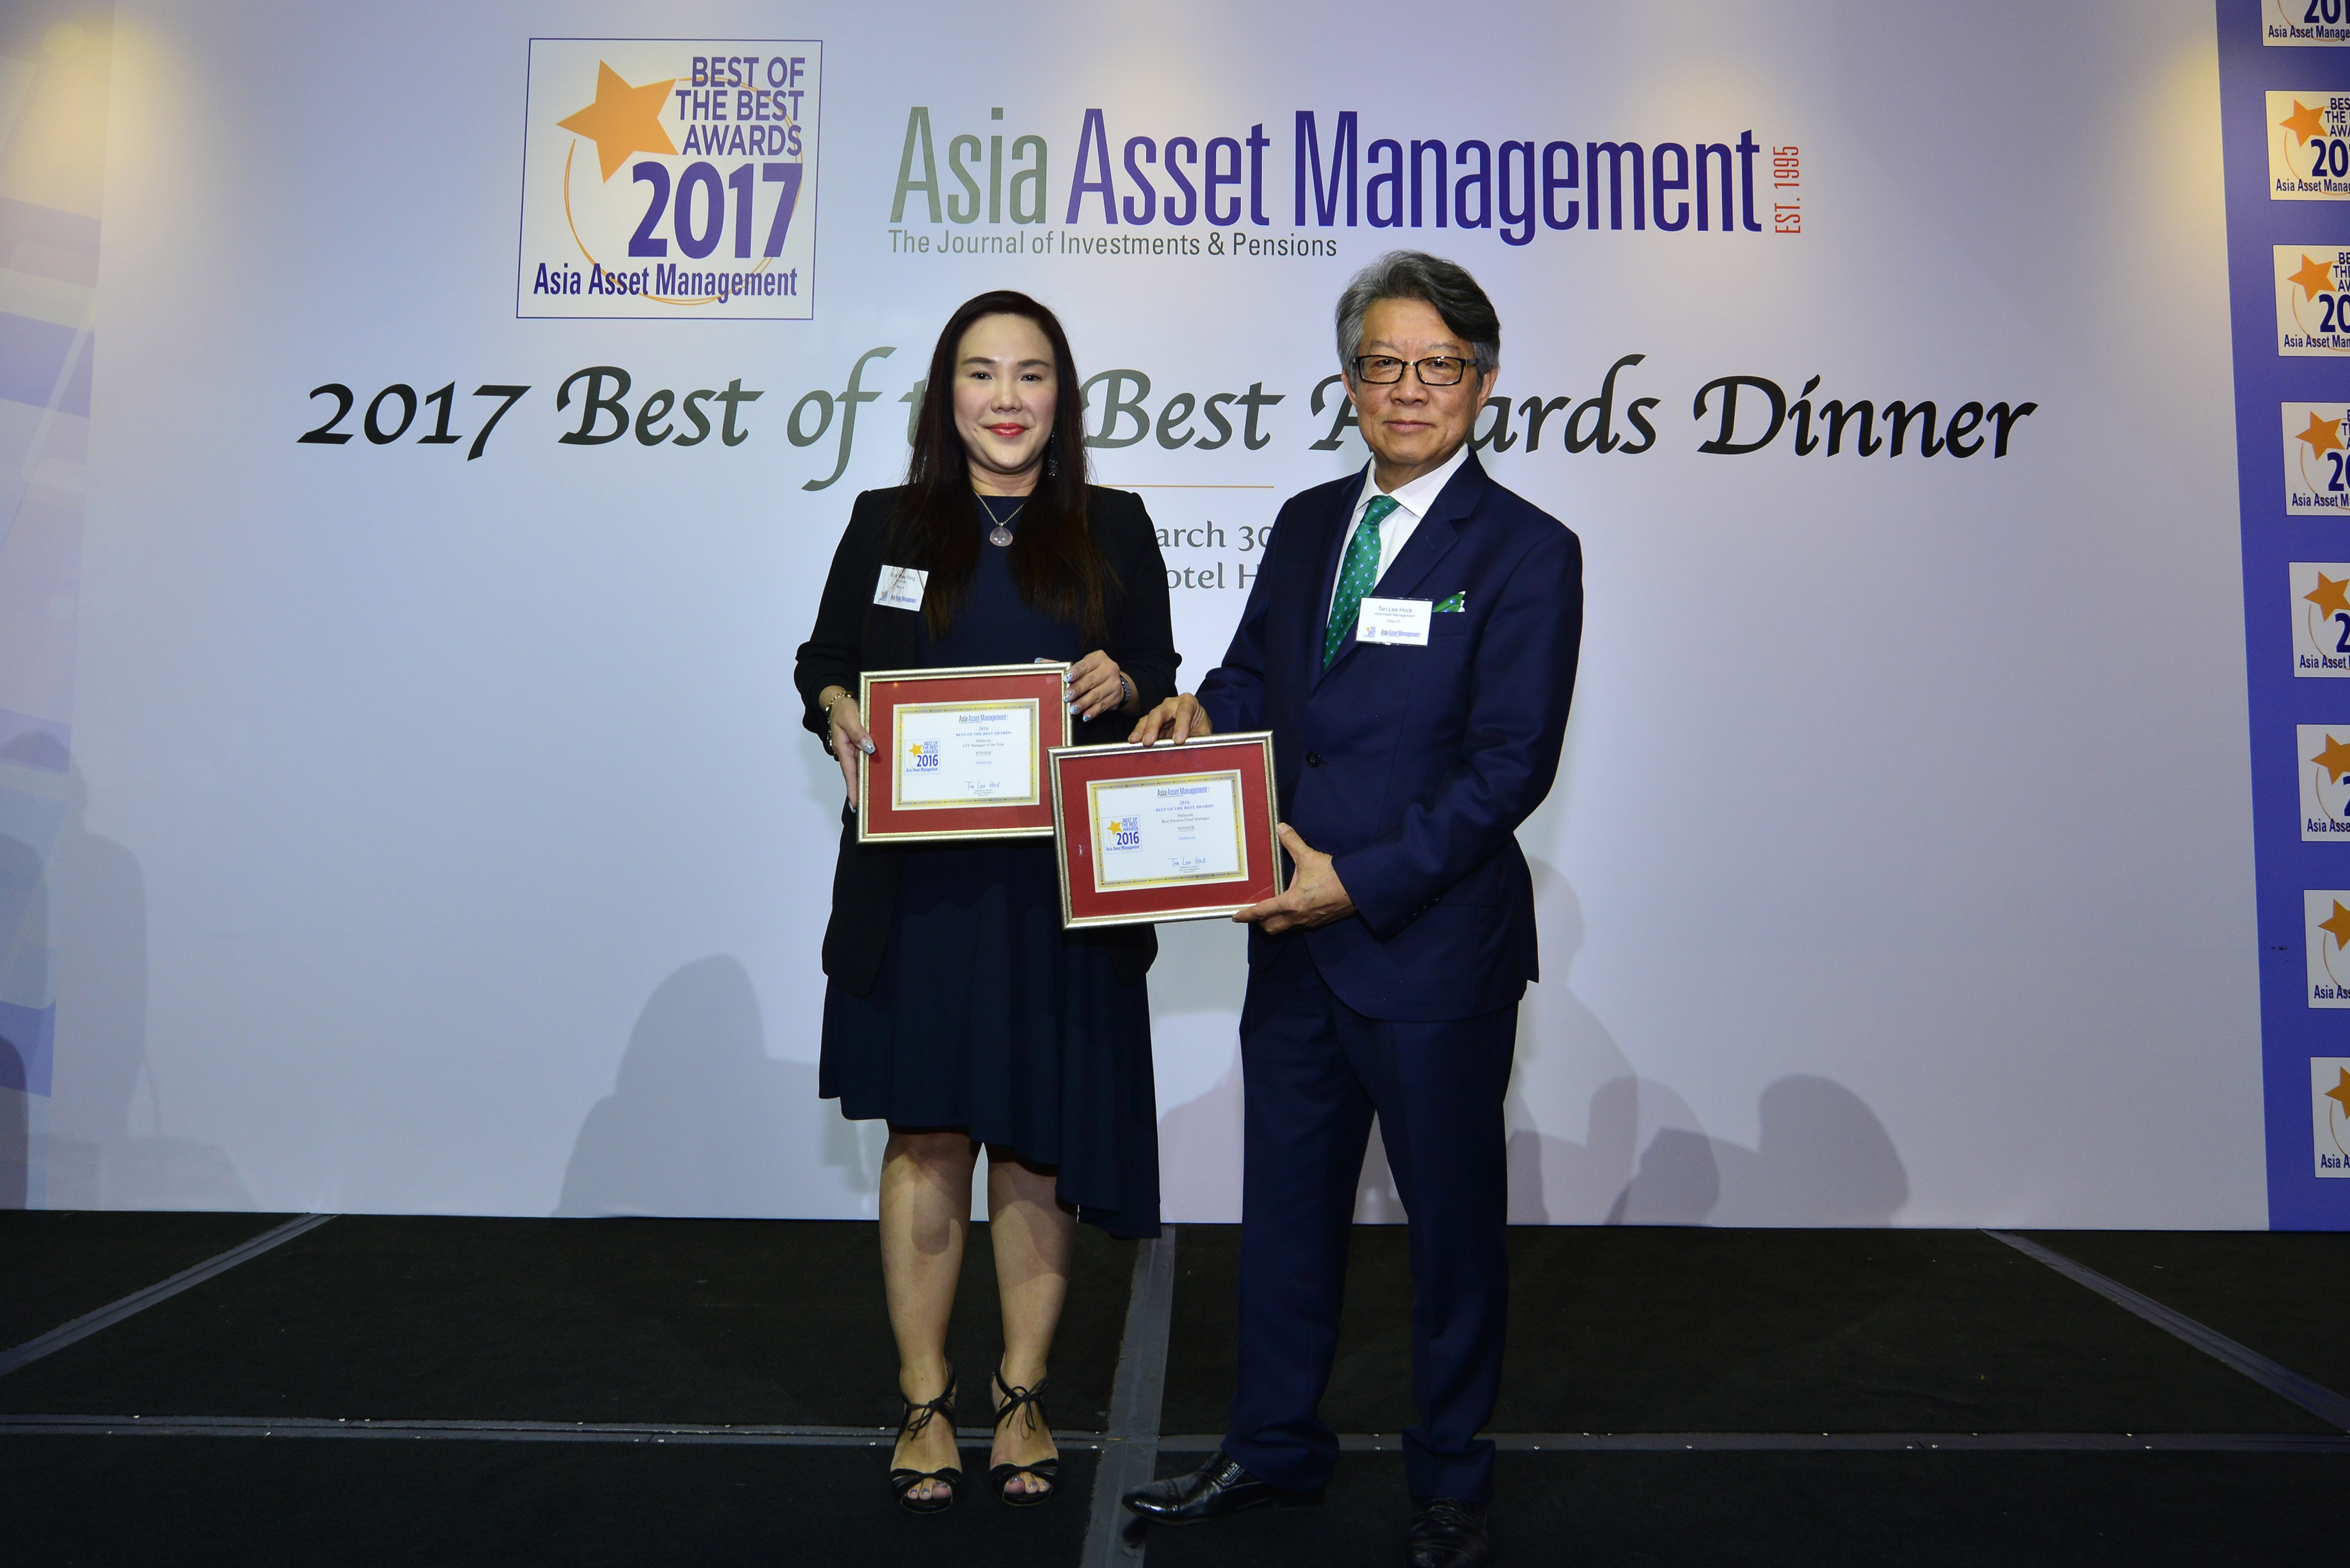 Aminvest Named Malaysia S Best Pension Fund Manager A Fourth Time And Etf Manager Of The Year Ambank Group Malaysia